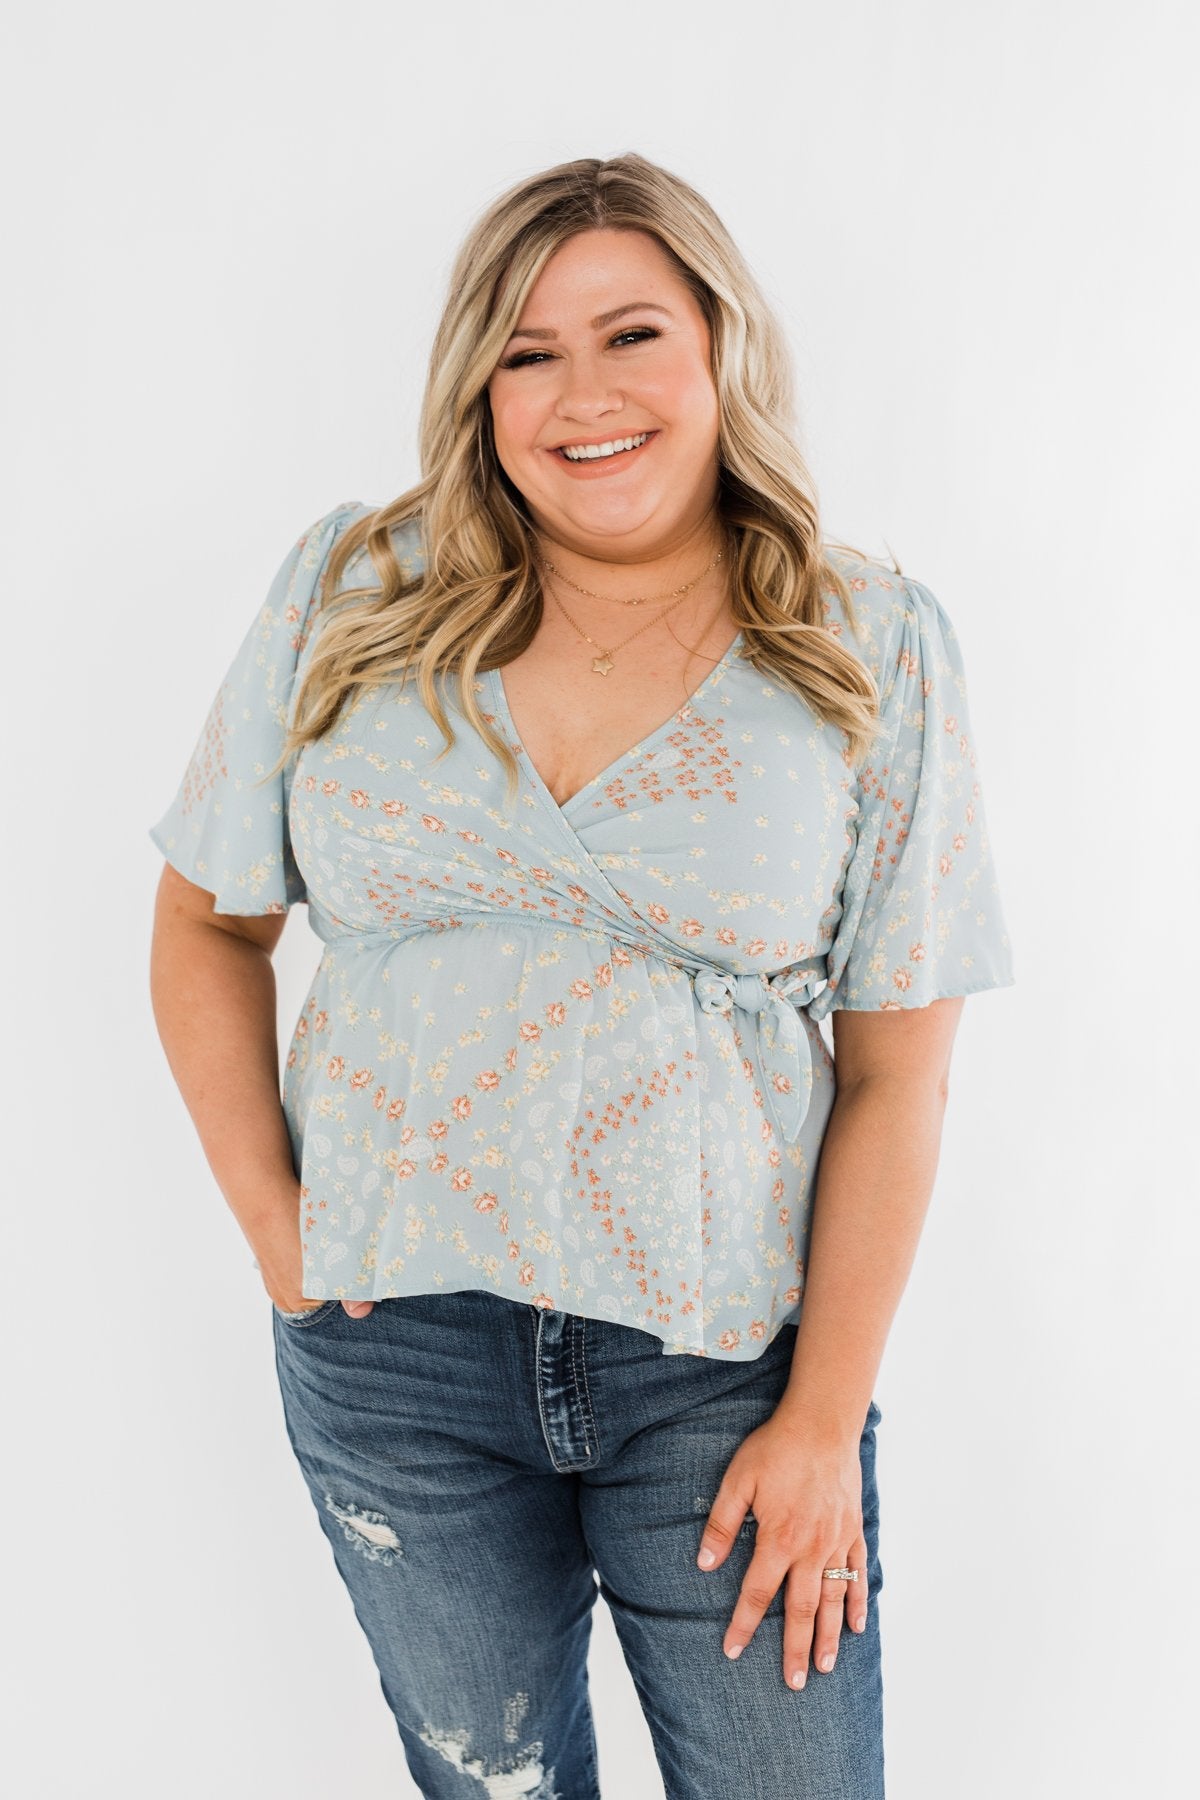 The Things You Say Floral Wrap Top- Light Blue